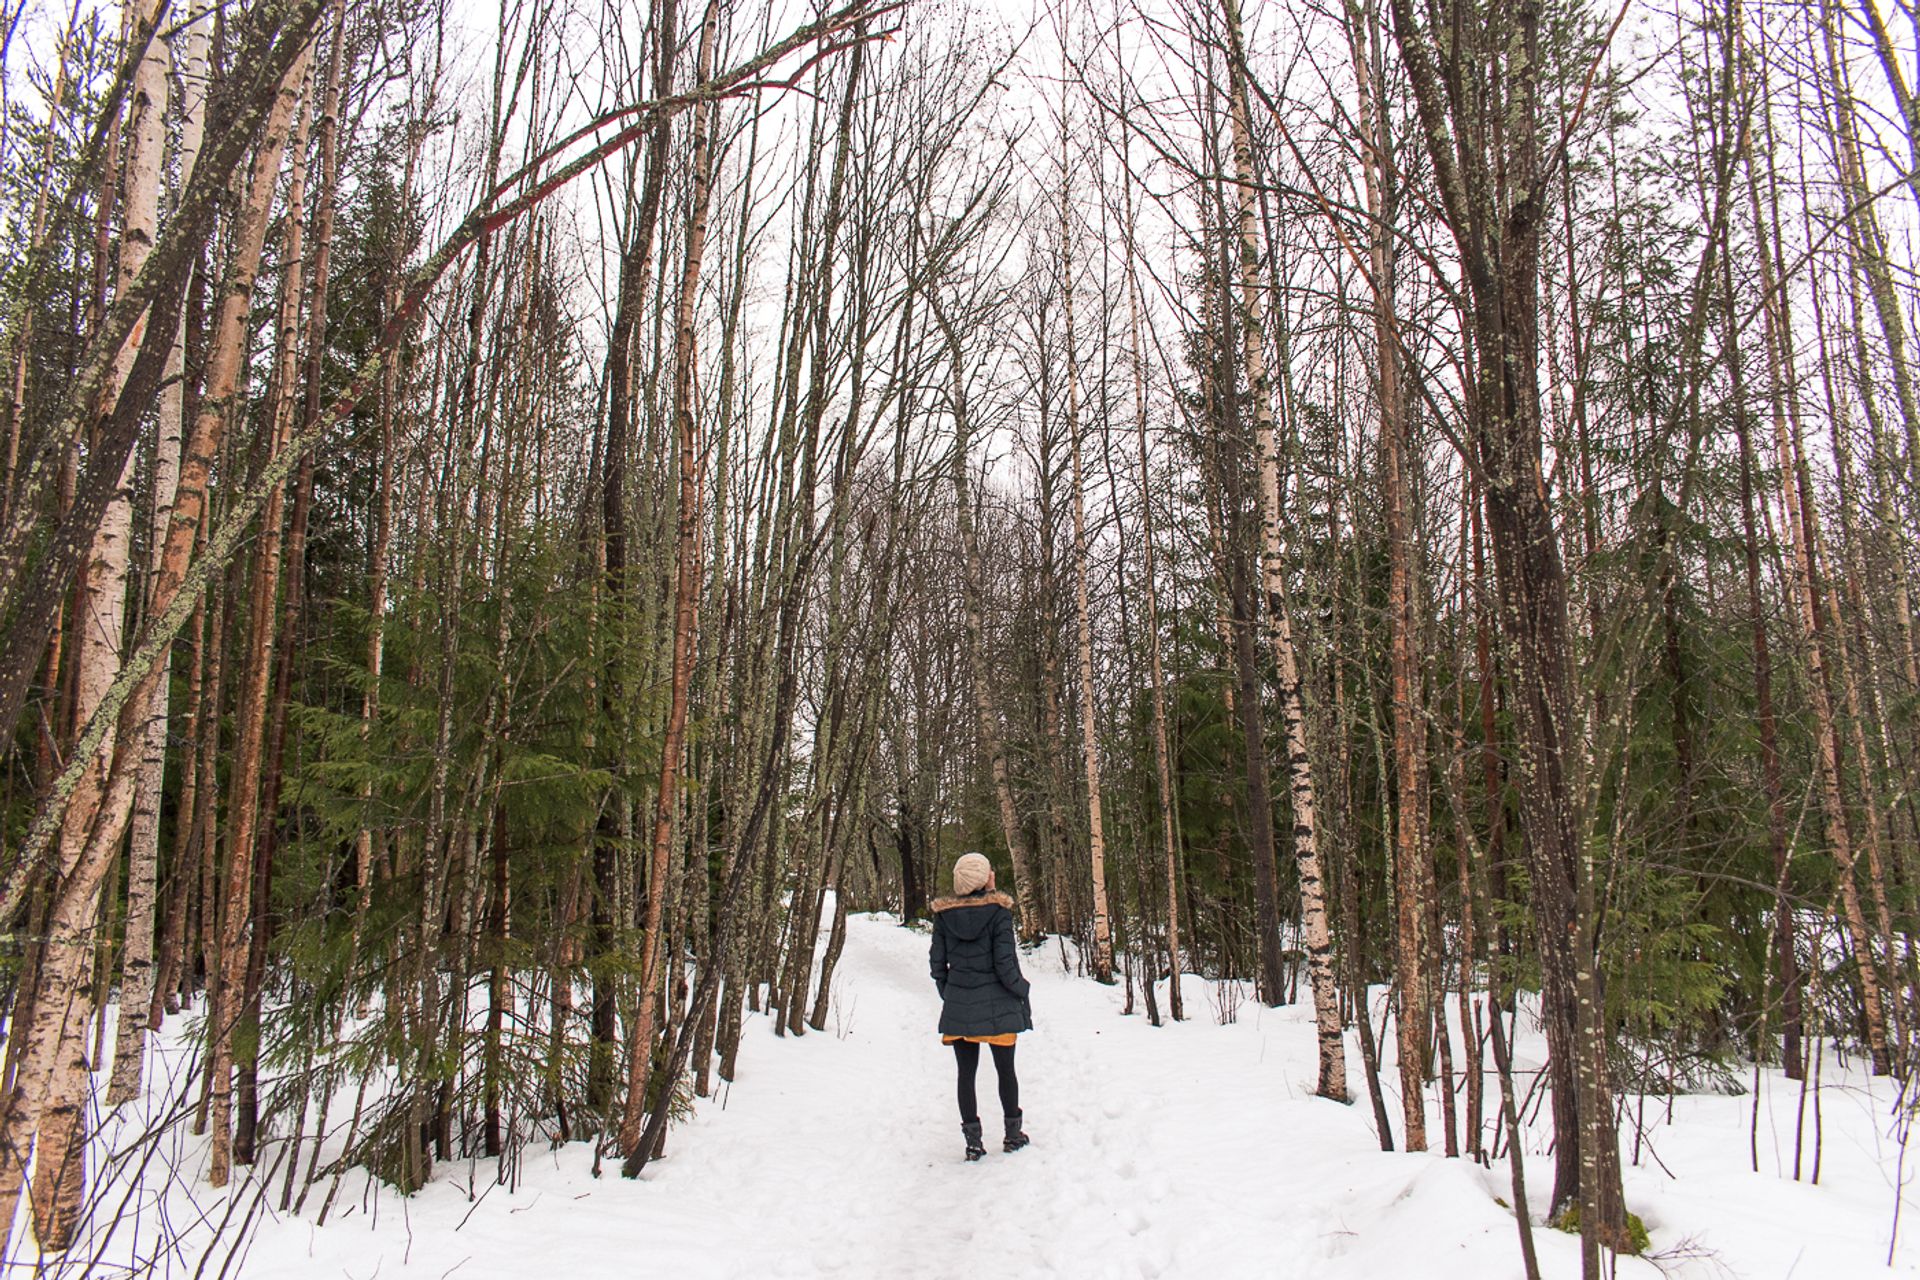 Person standing in a snowy forest.